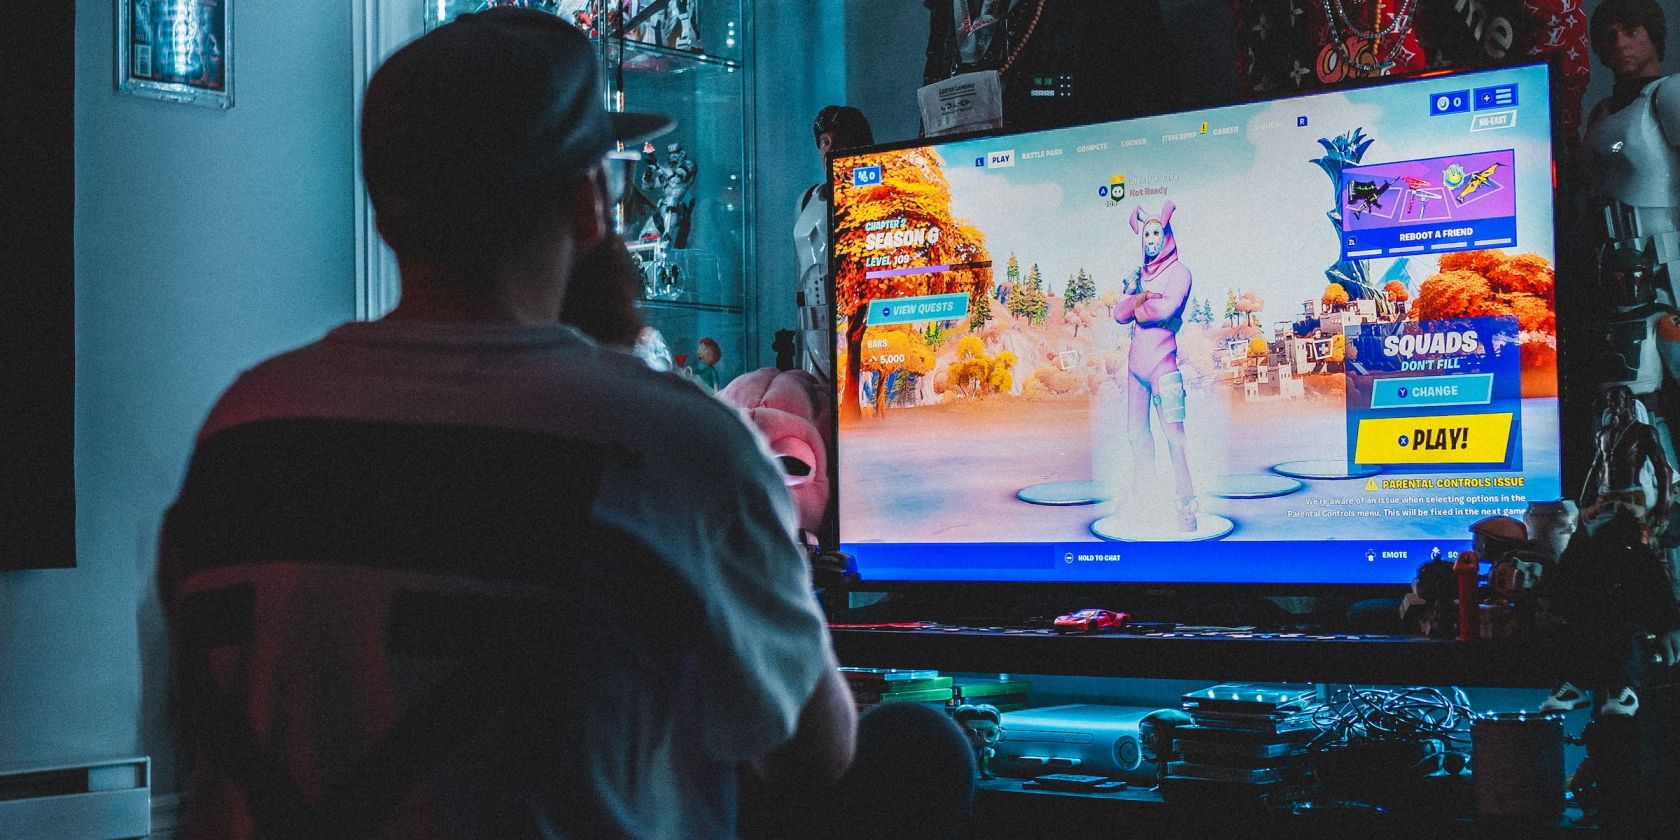 Gamer playing Fortnite on his TV